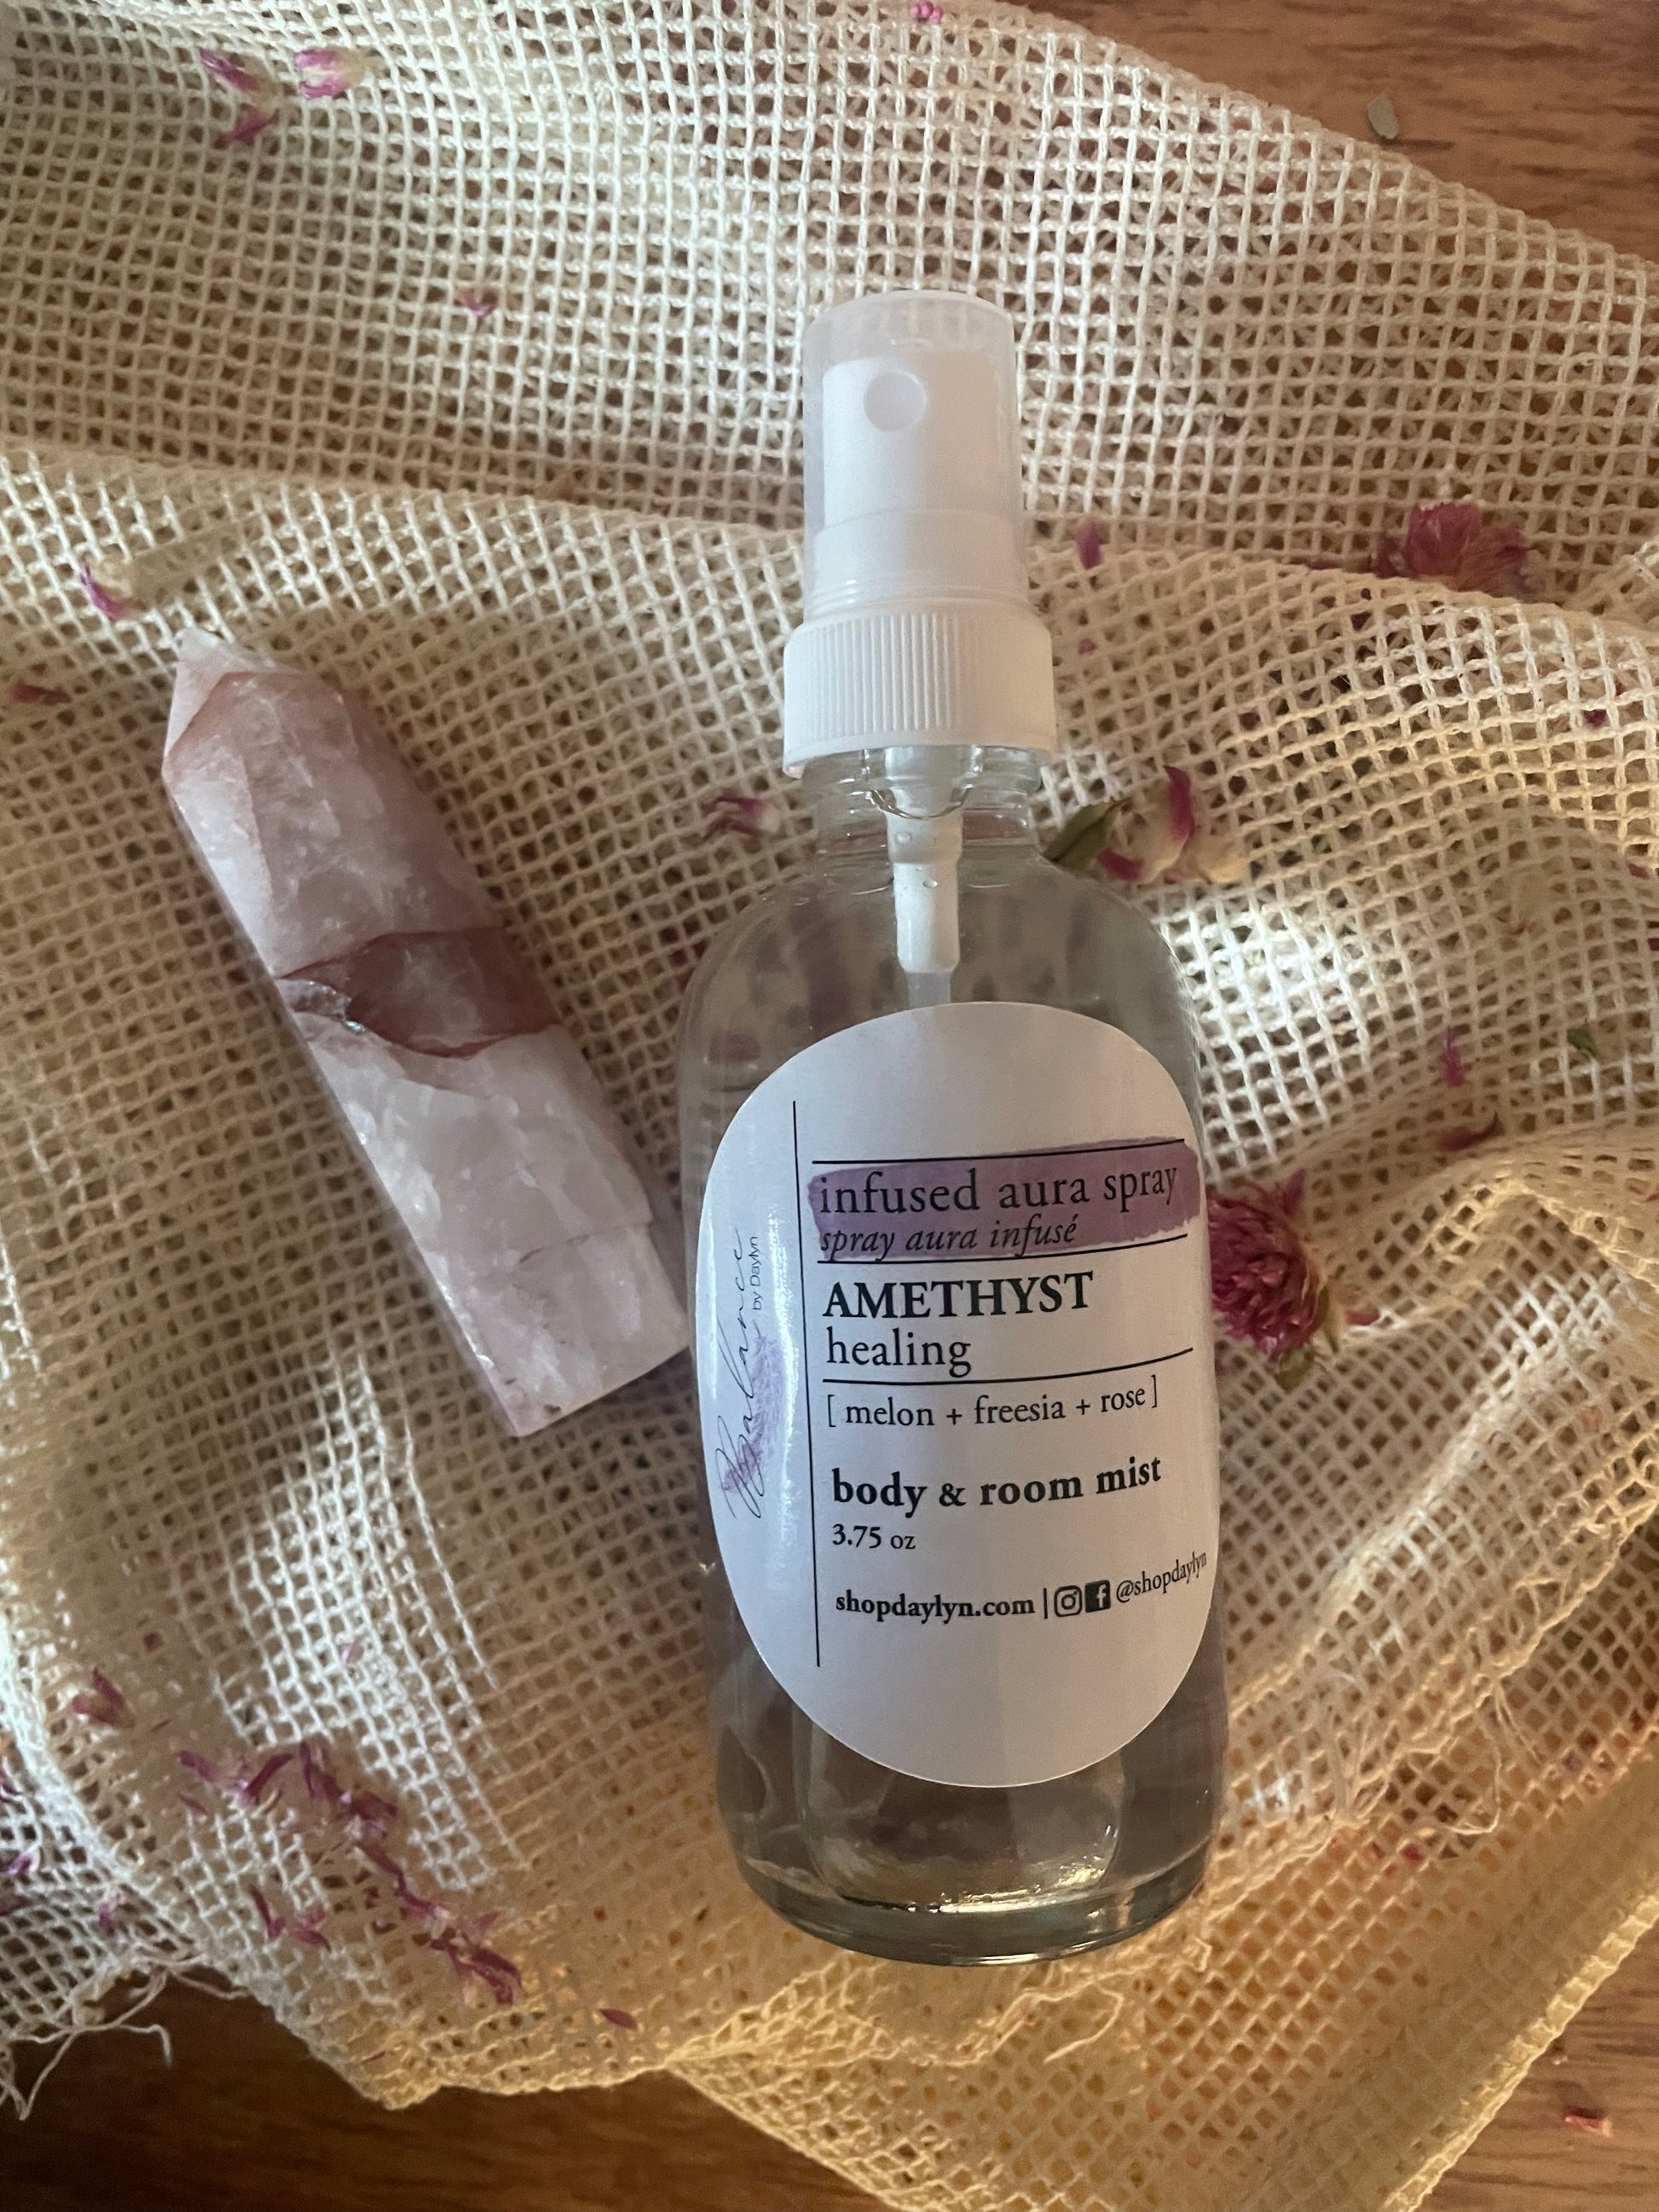 amethyst infused aura spray with melon freesia and rose scents body mist and aura setting spray